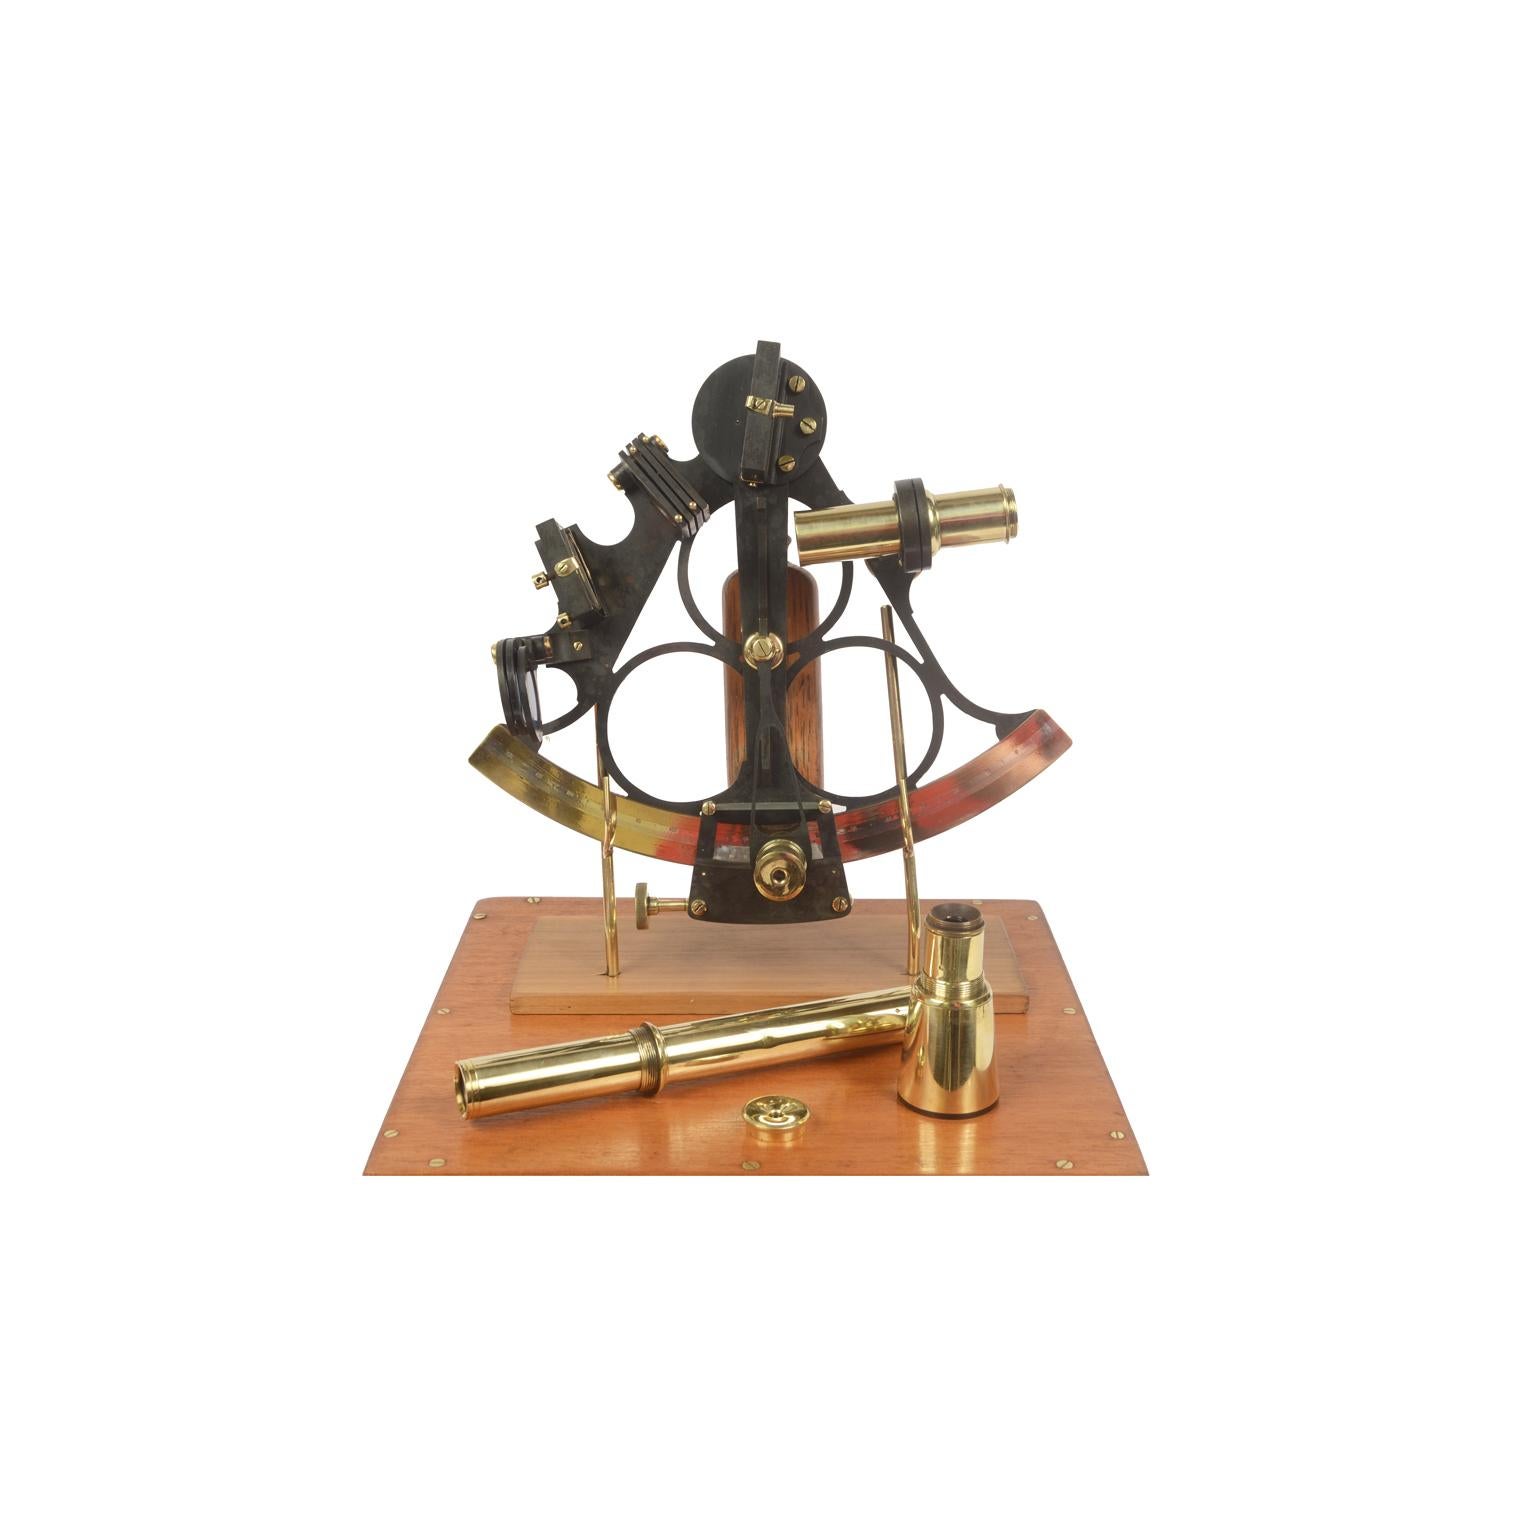 Mid-19th century English sextant of burnished brass, instrument complete with three telescopes, one of which is long, and a filter and it is in its original mahogany box with brass hinges and handle. Brass frame with engraved silver goniometric